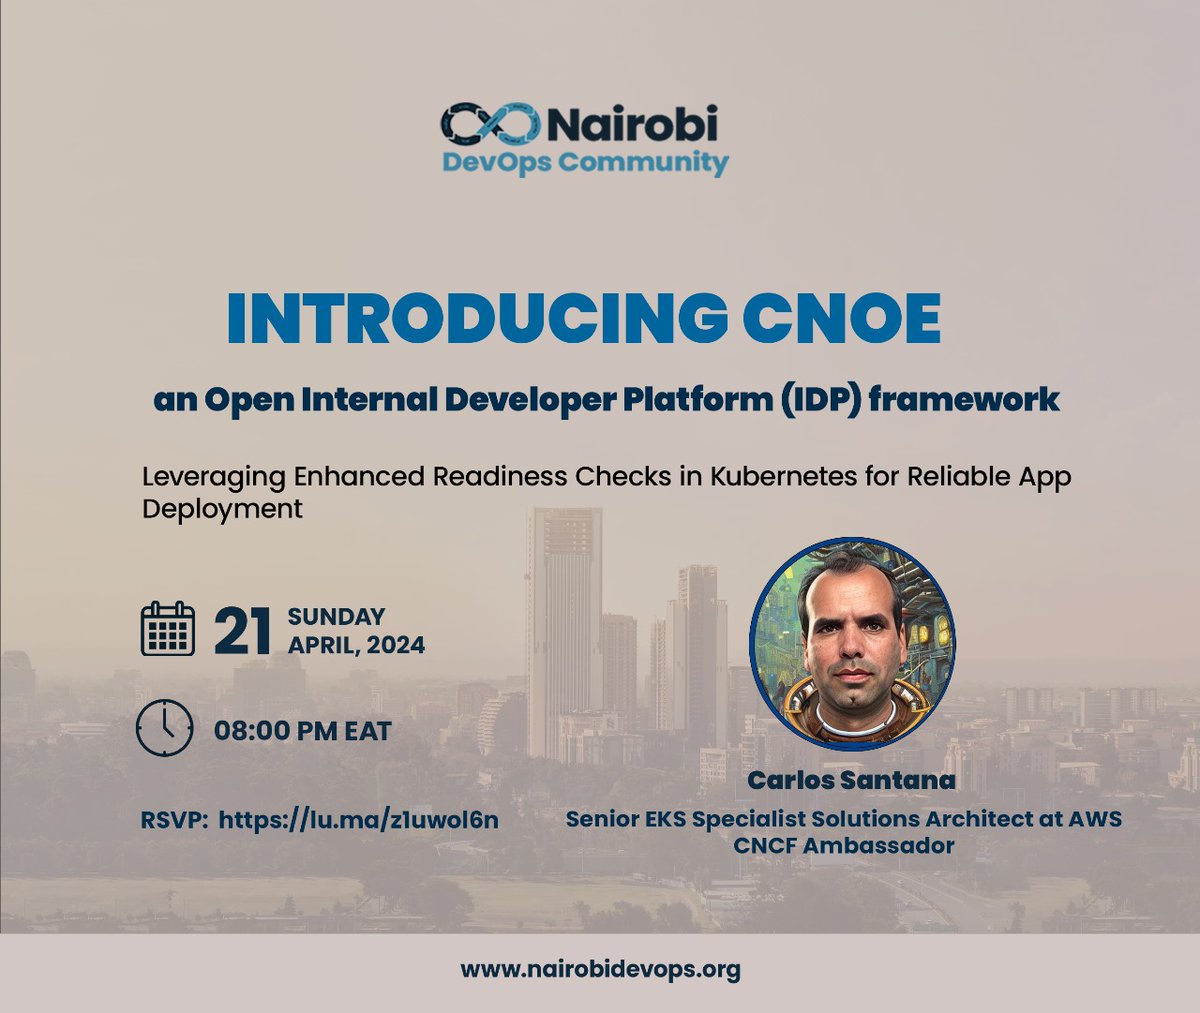 Join us for an enlightening session on CNOE, led by industry expert and @CNCFAmbassadors @csantanapr. Explore how CNOE can revolutionize your Internal Developer Platform. 📅 Date: 21st Sunday, April 2024 🕒 Time: 8.00 PM (GMT+3) 📍 RSVP: lu.ma/z1uwol6n #idp #devops